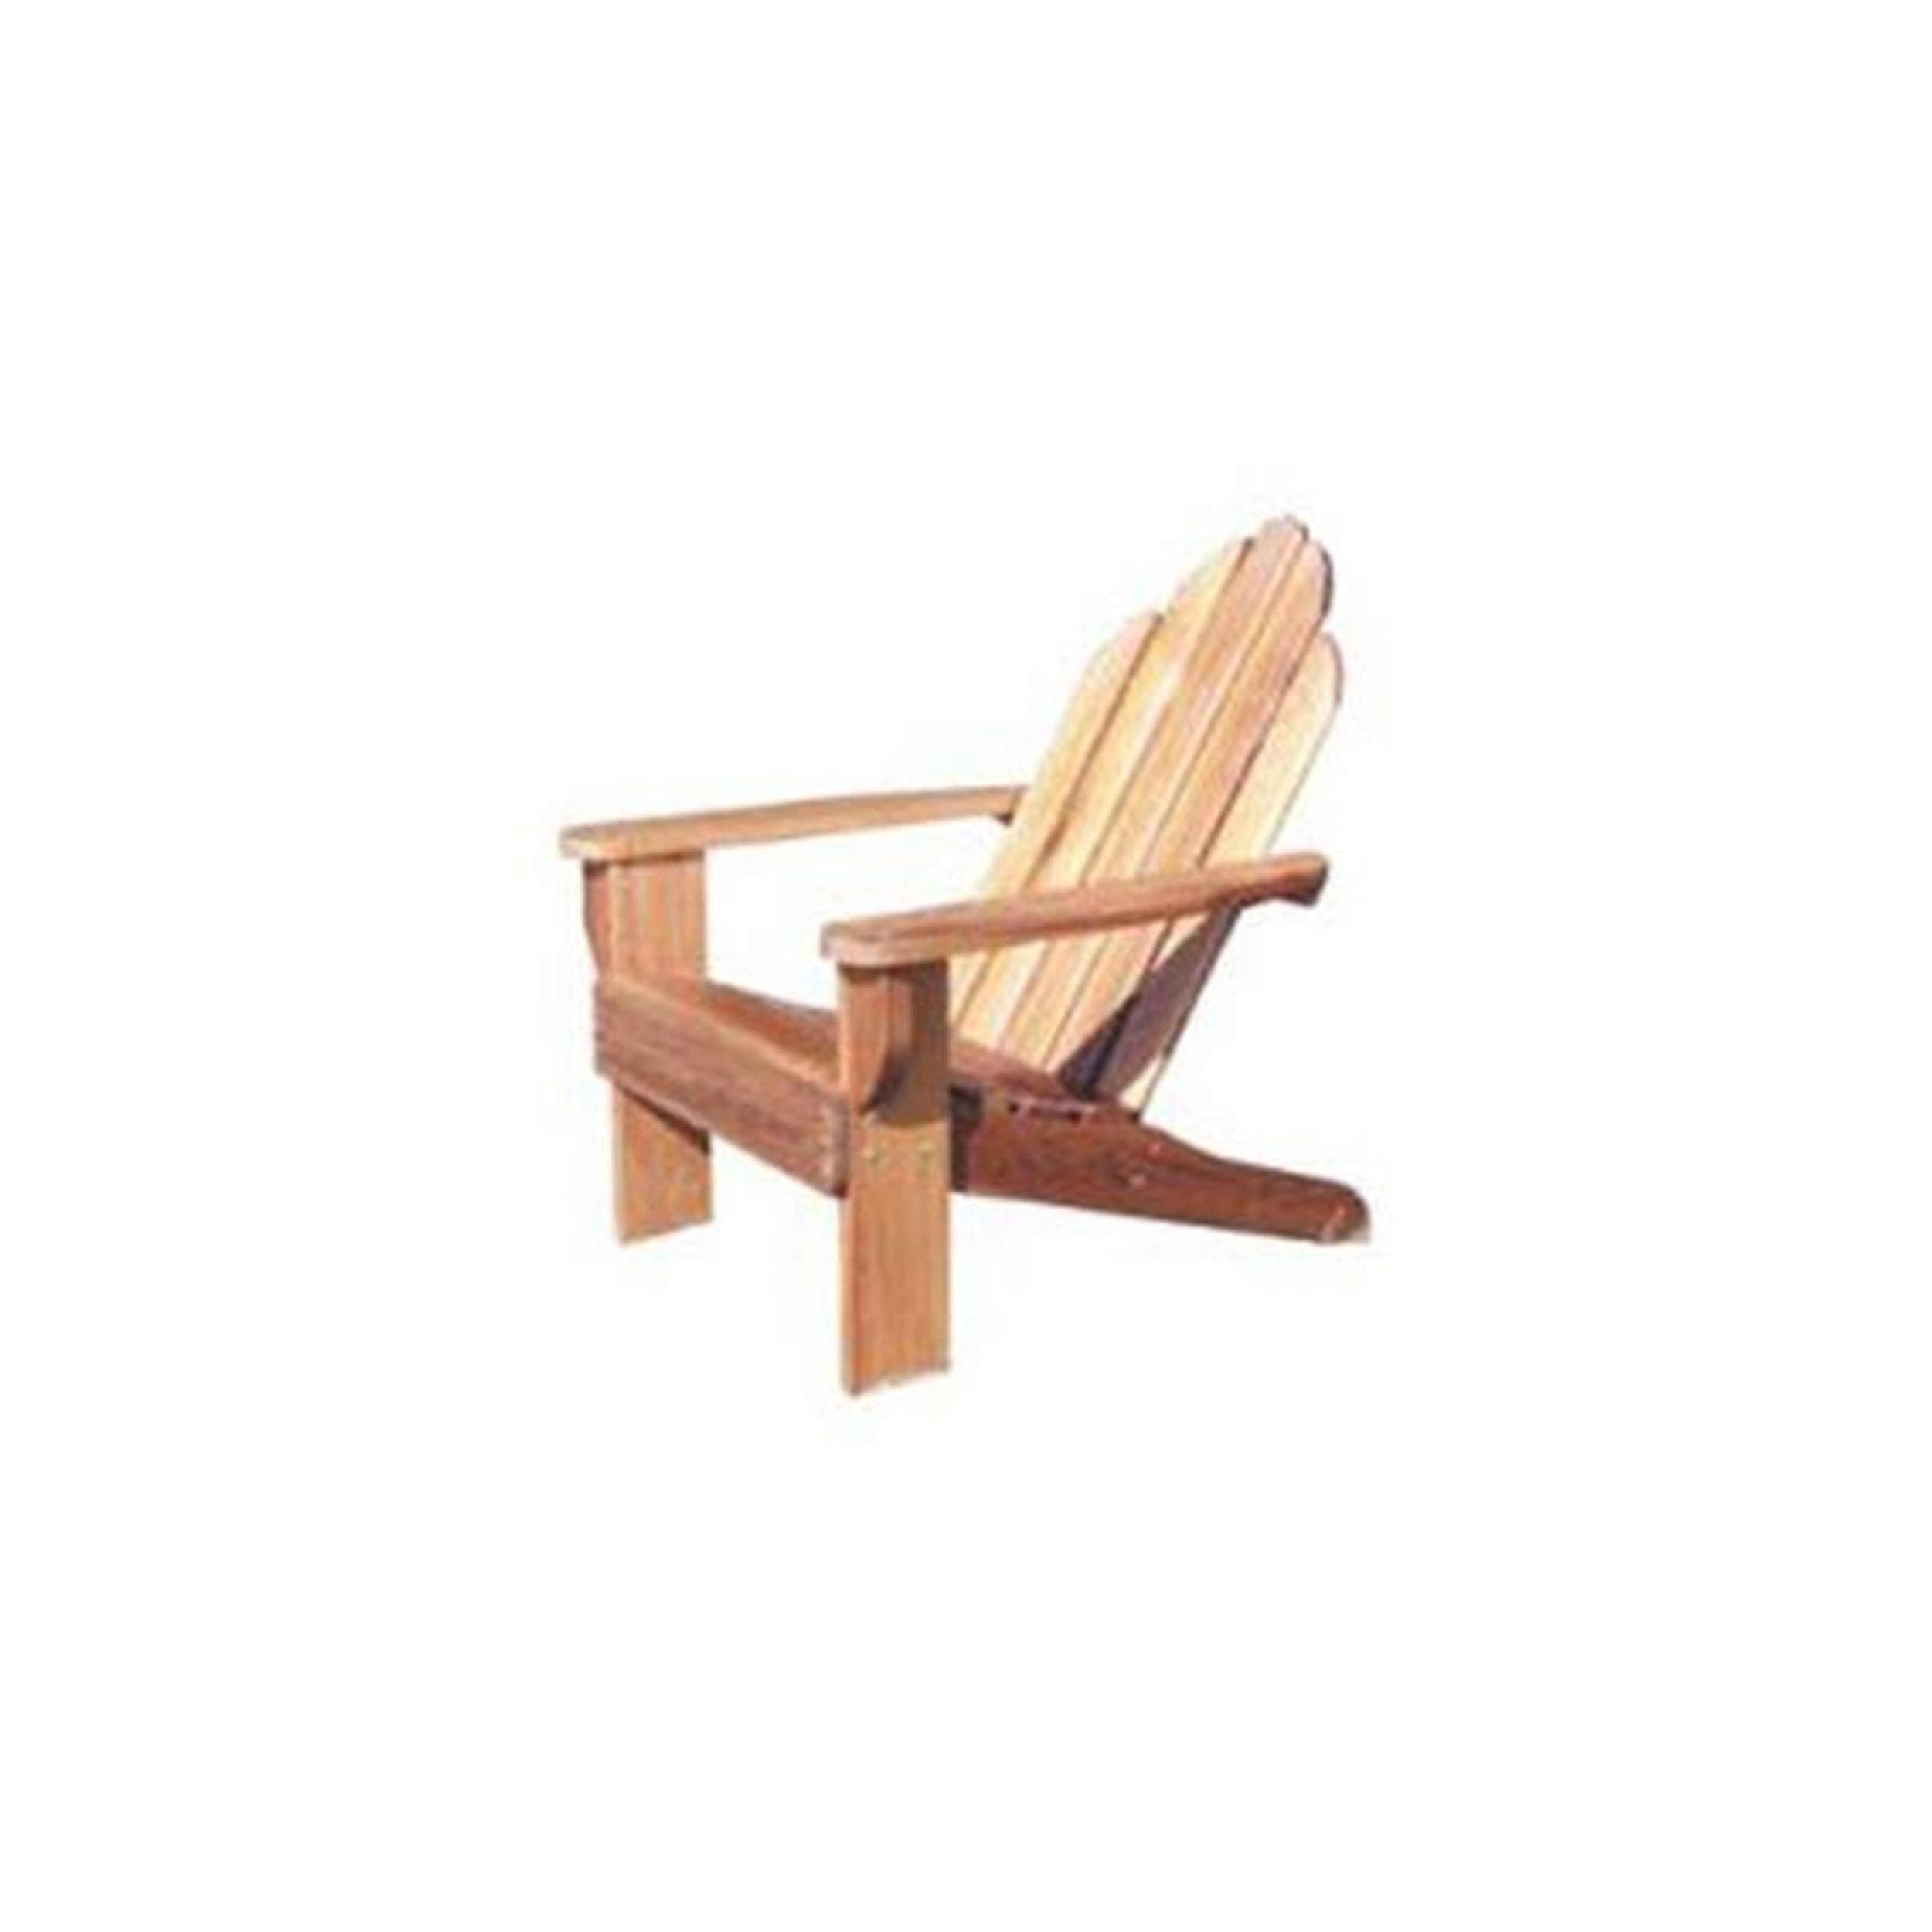 Woodworking Project Paper Plan To Build Classic Adirondack Chair